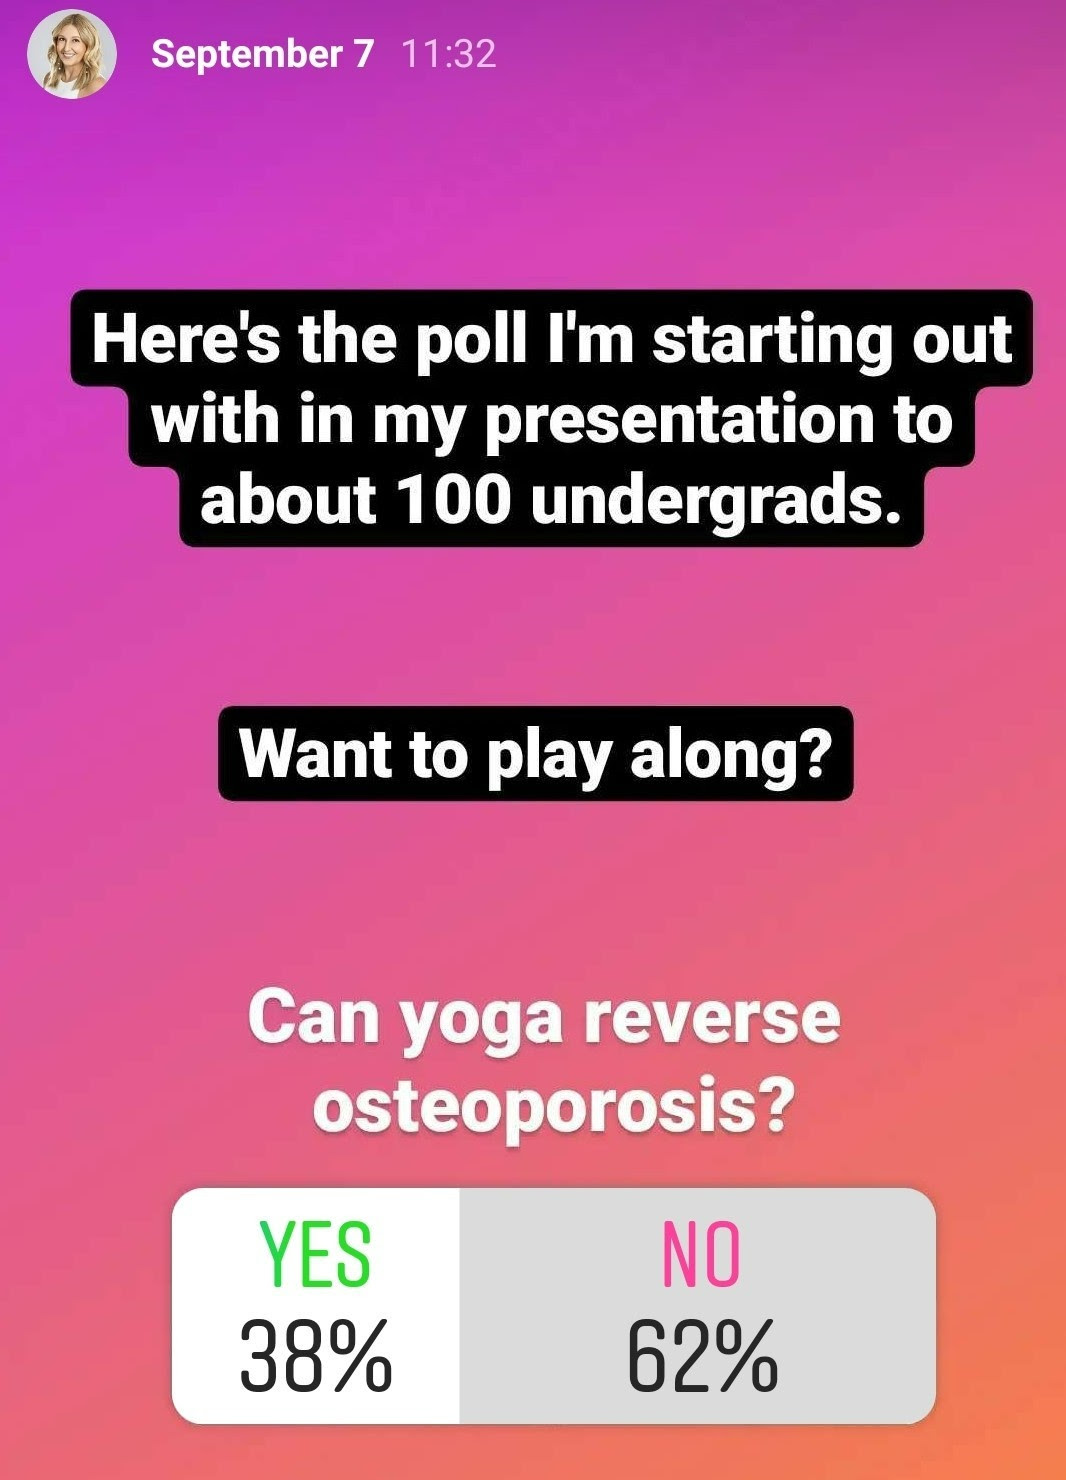 38% of yoga teachers say yes, 62% of yoga teachers say no to the question "Can yoga reverse osteoporosis?"